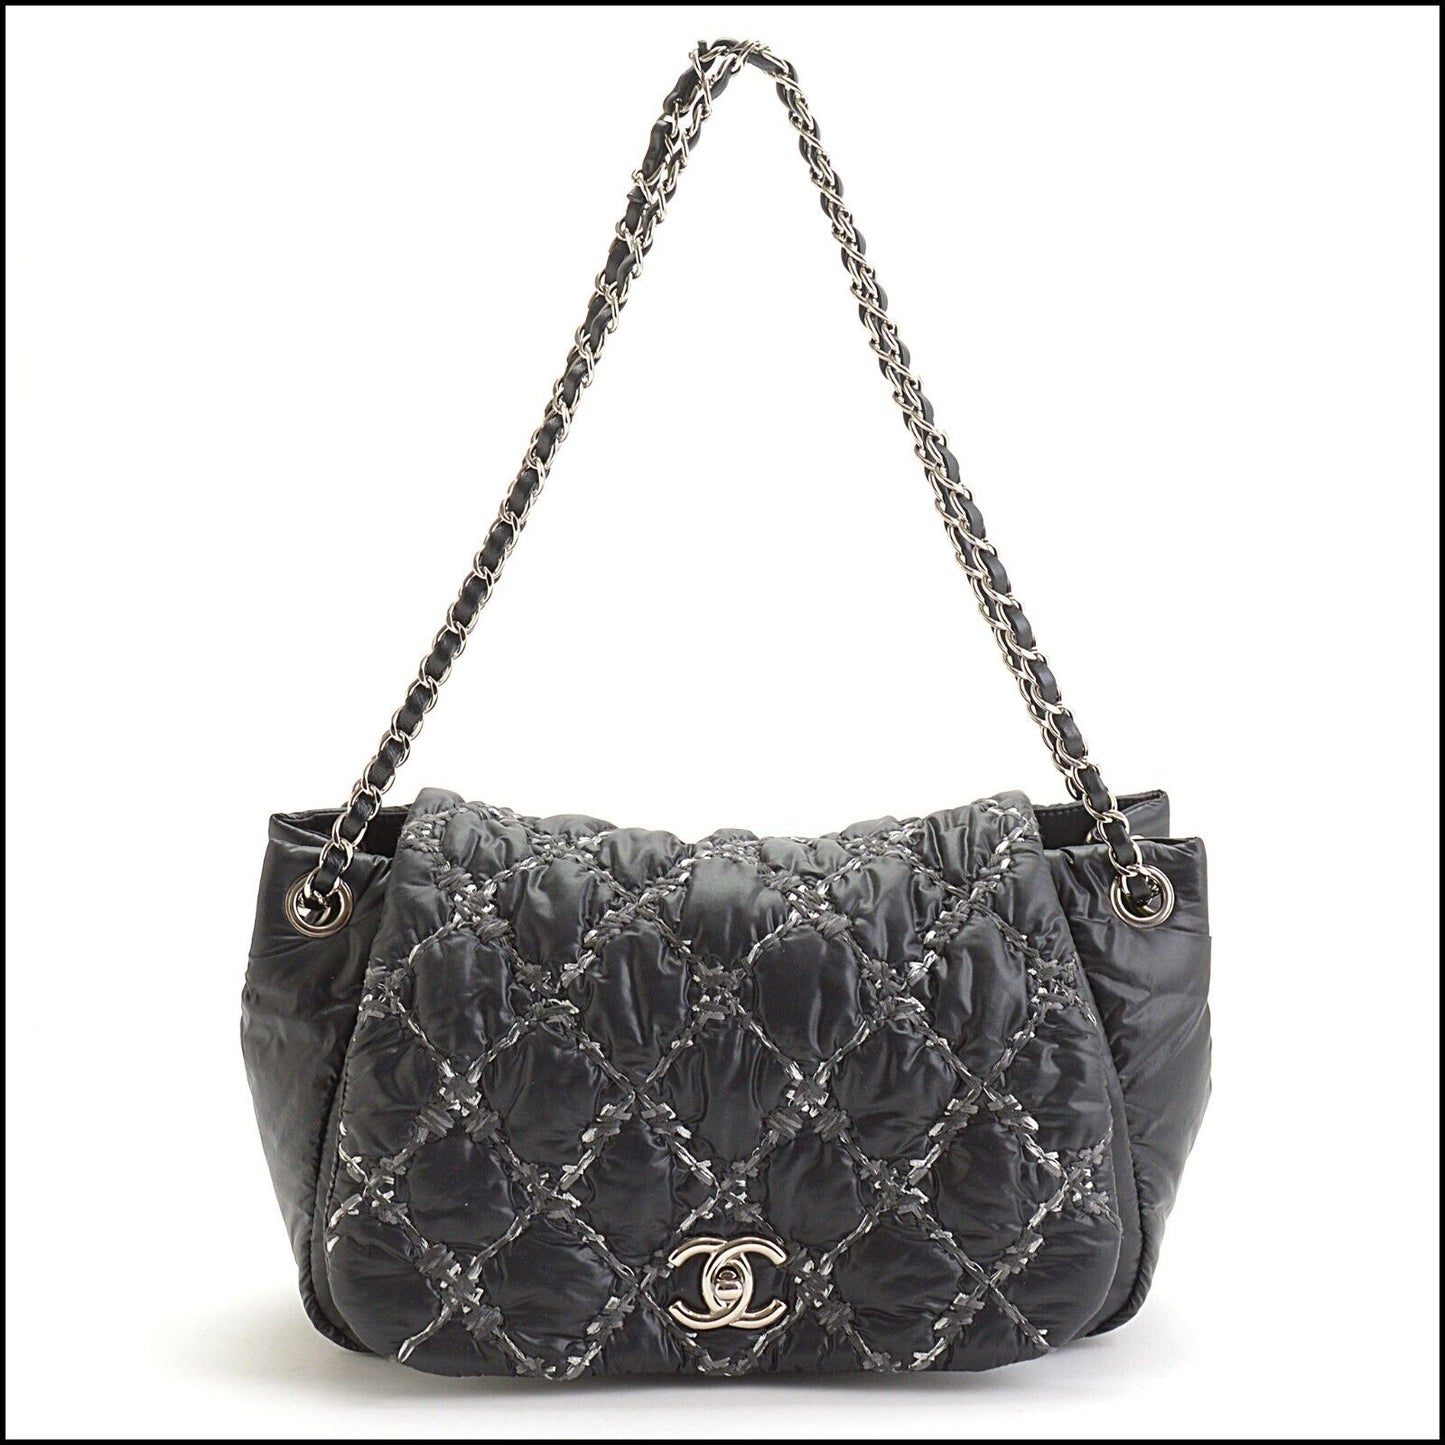 RDC13658 Authentic CHANEL 2011 Black Quilted Nylon Tweed Accordion Flap Bag